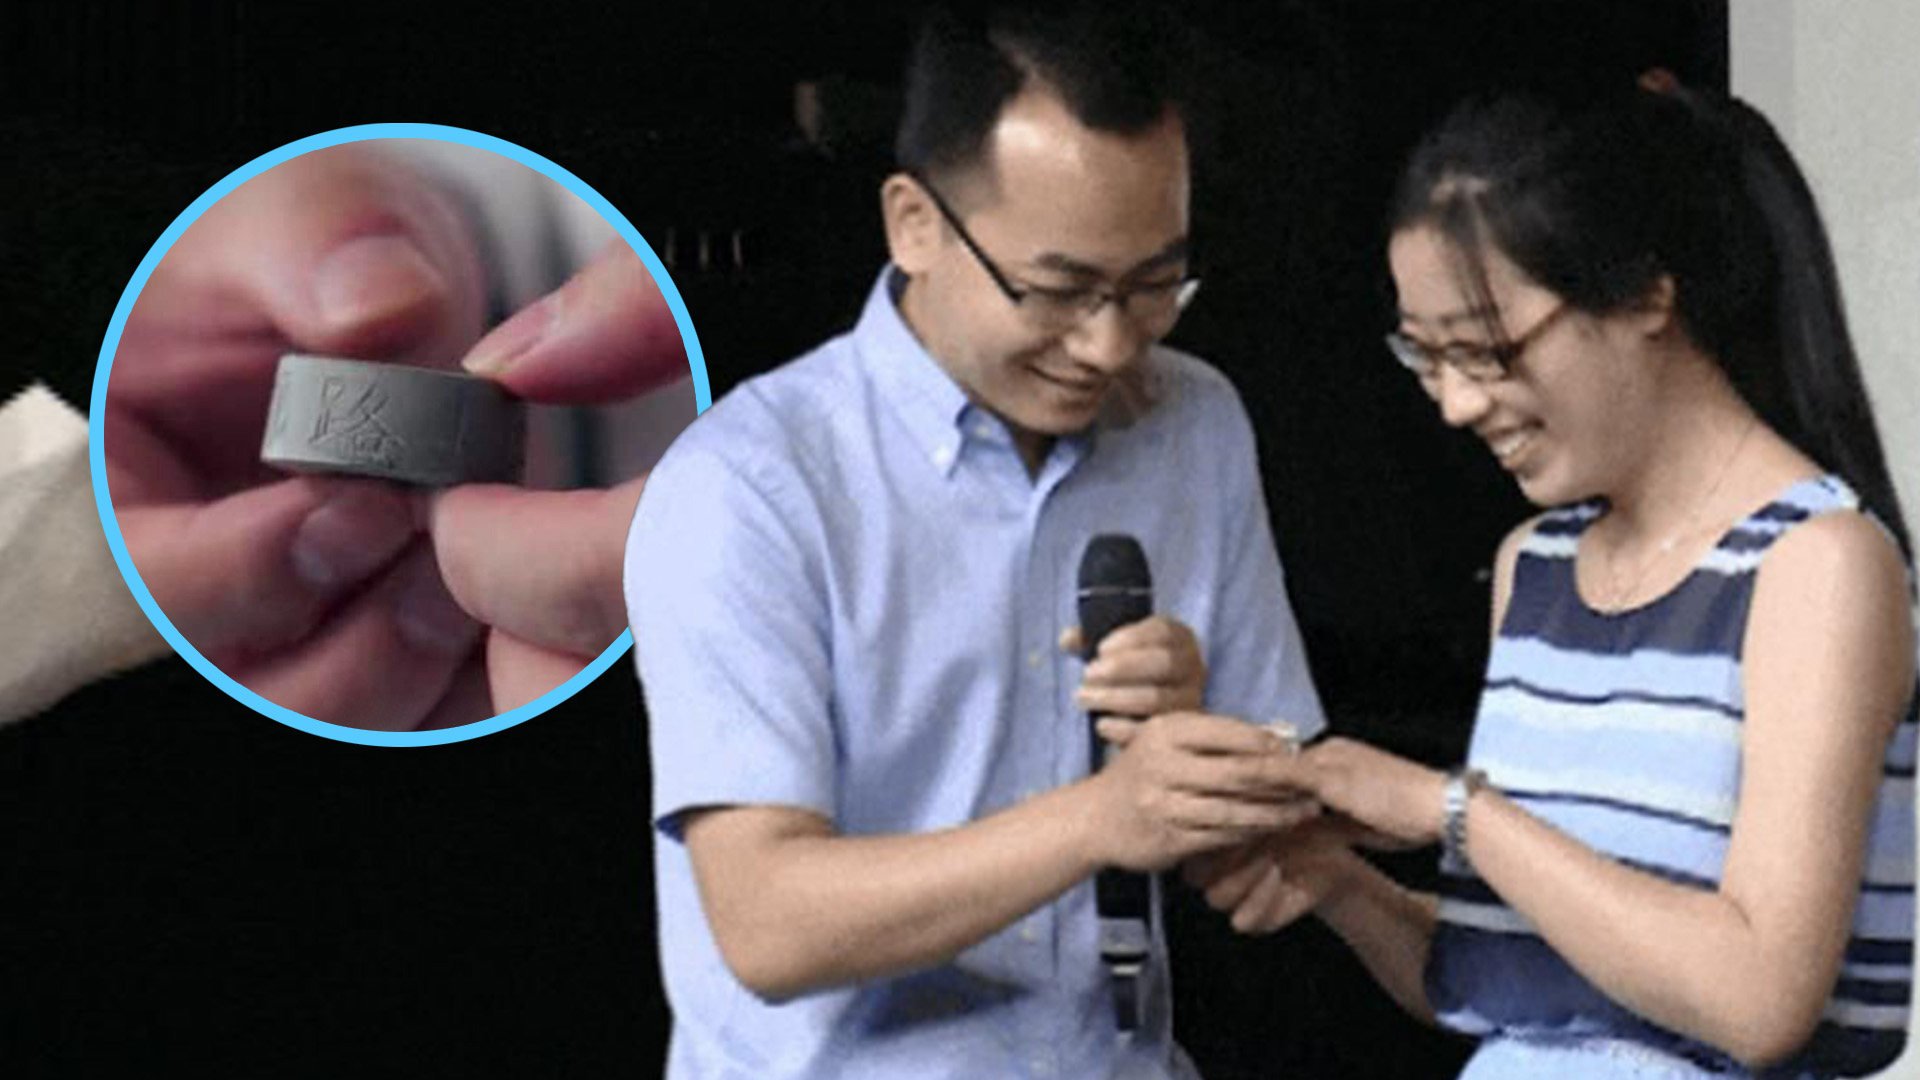 An award-winning inventor in China has shocked social media by giving his wife-to-be an engagement ring made out of his signature product, waterproof concrete. Photo: SCMP composite/Jimu